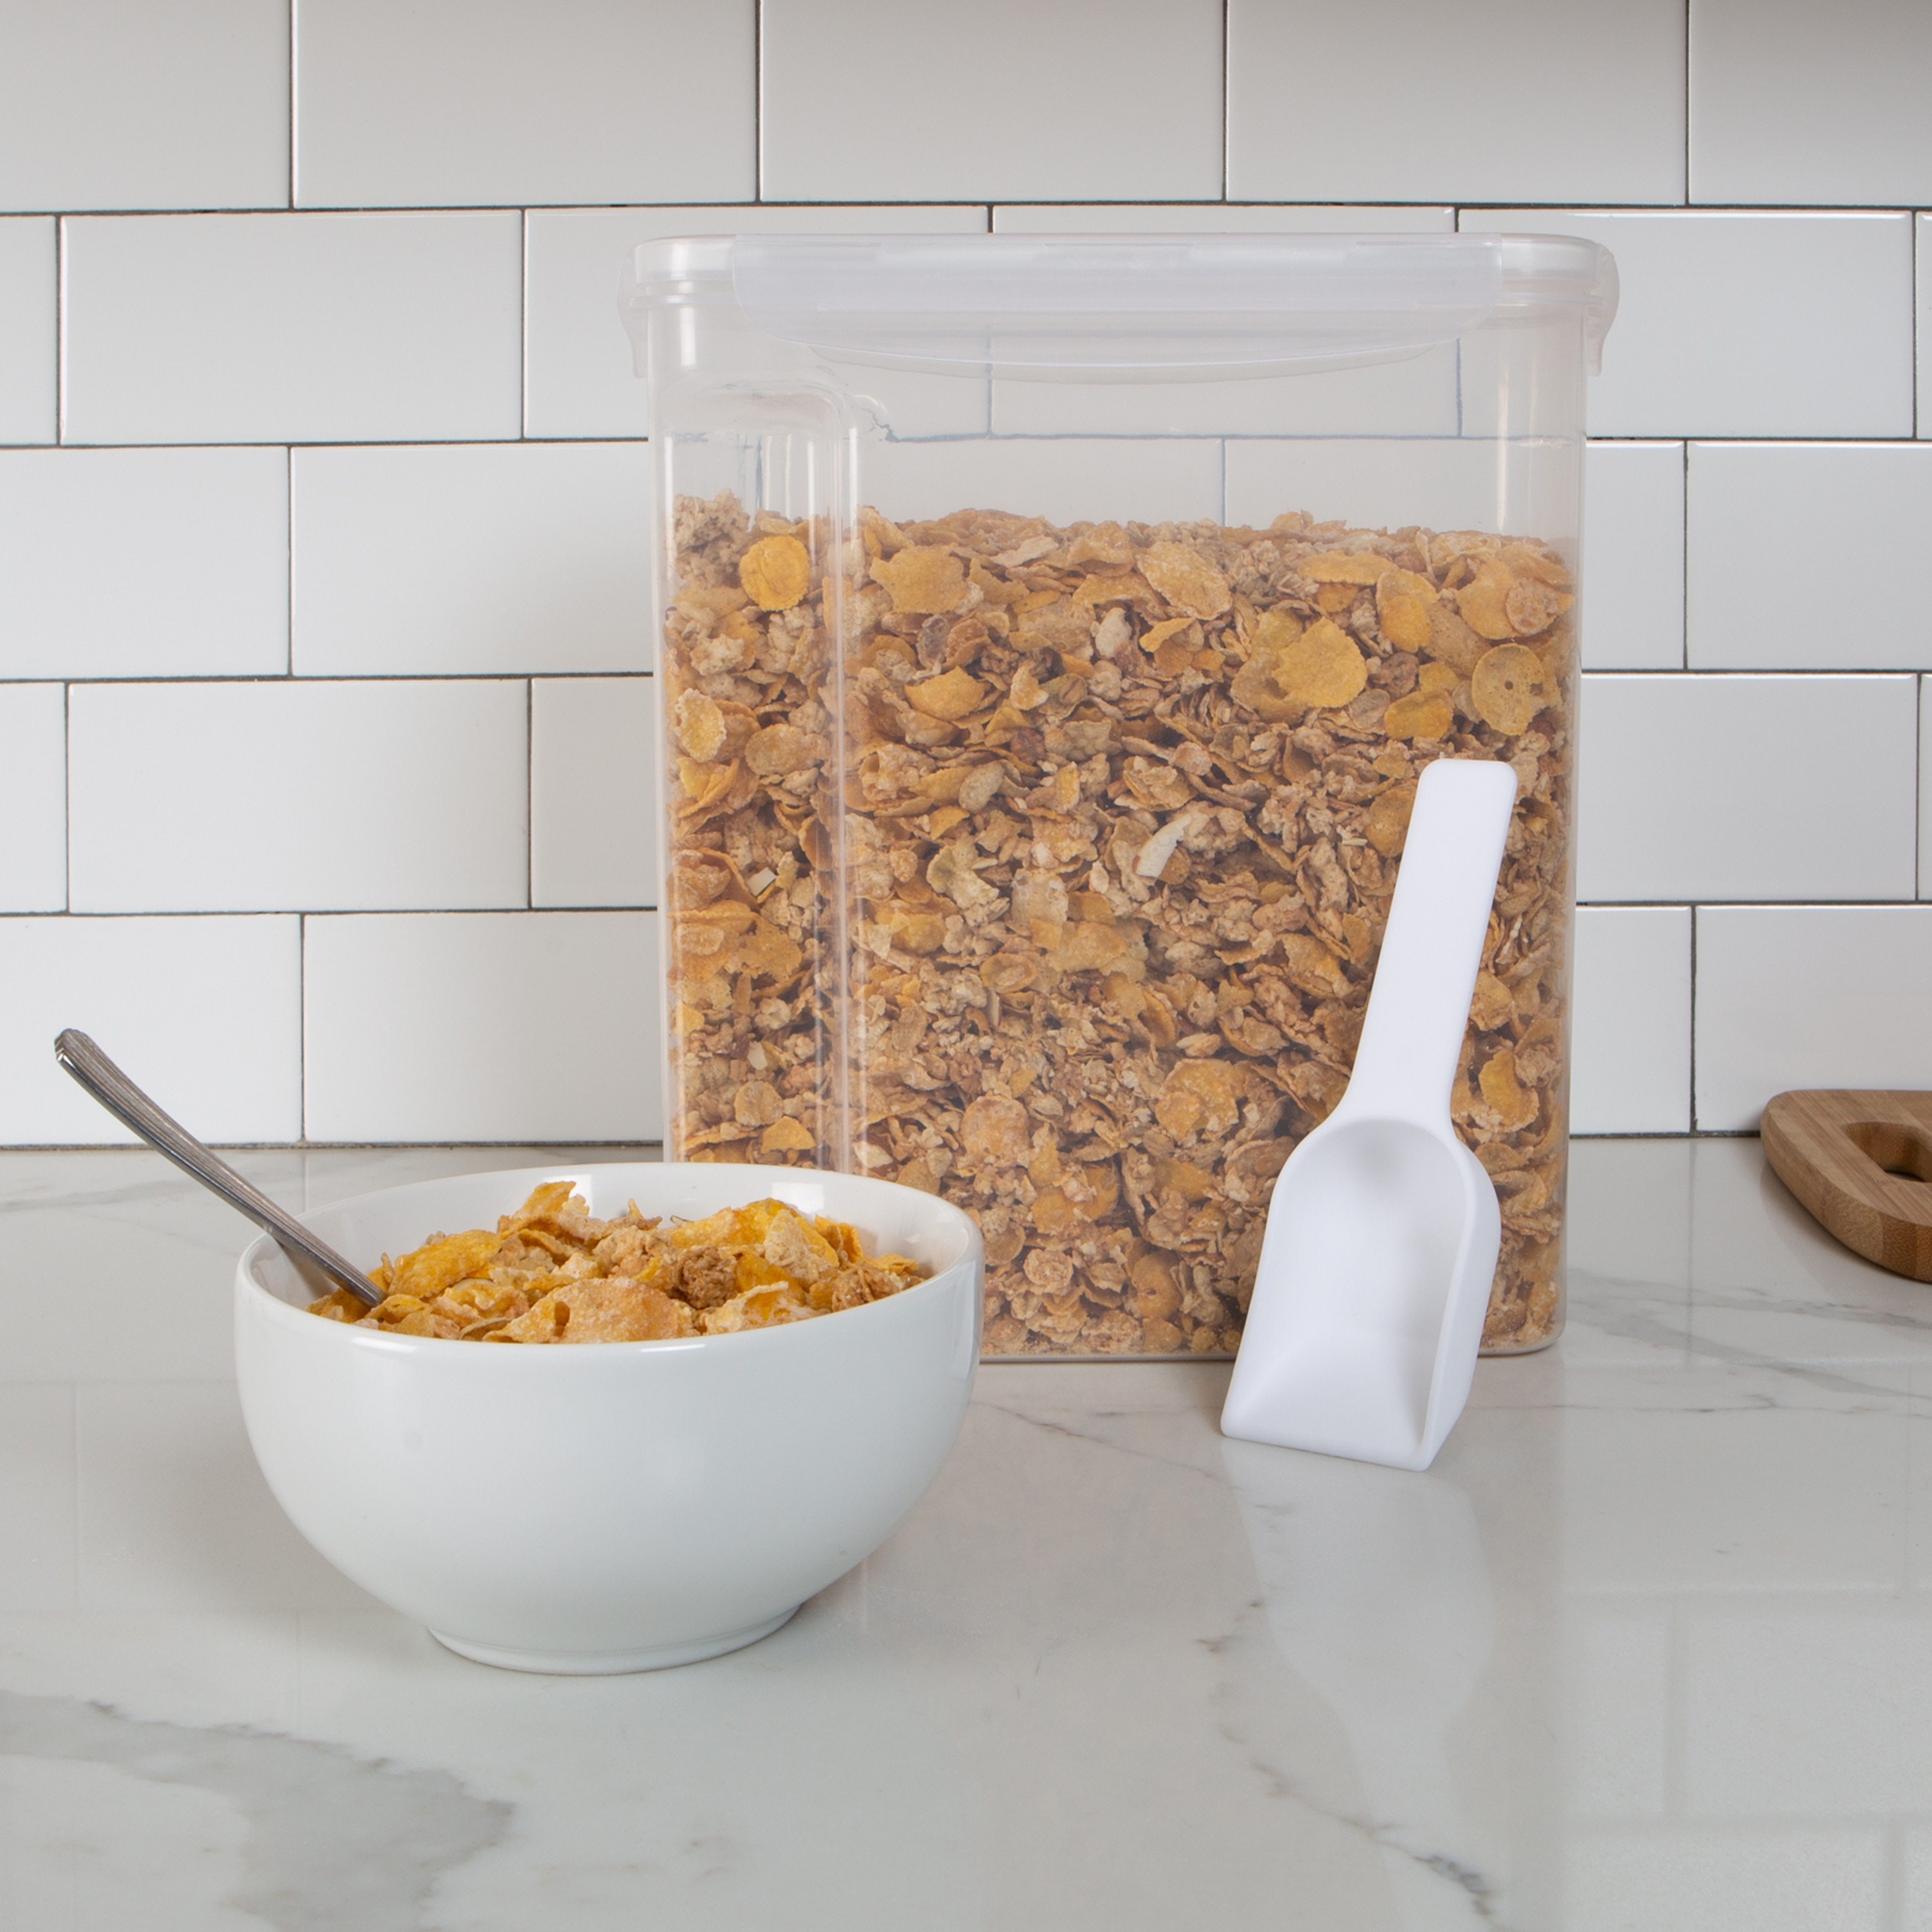 https://ak1.ostkcdn.com/images/products/is/images/direct/5358e366045f125c99604bdd57df0b2ada3ff8bd/Kitchen-Details-Large-Size-Airtight-Cereal-Container-with-Scooper.jpg